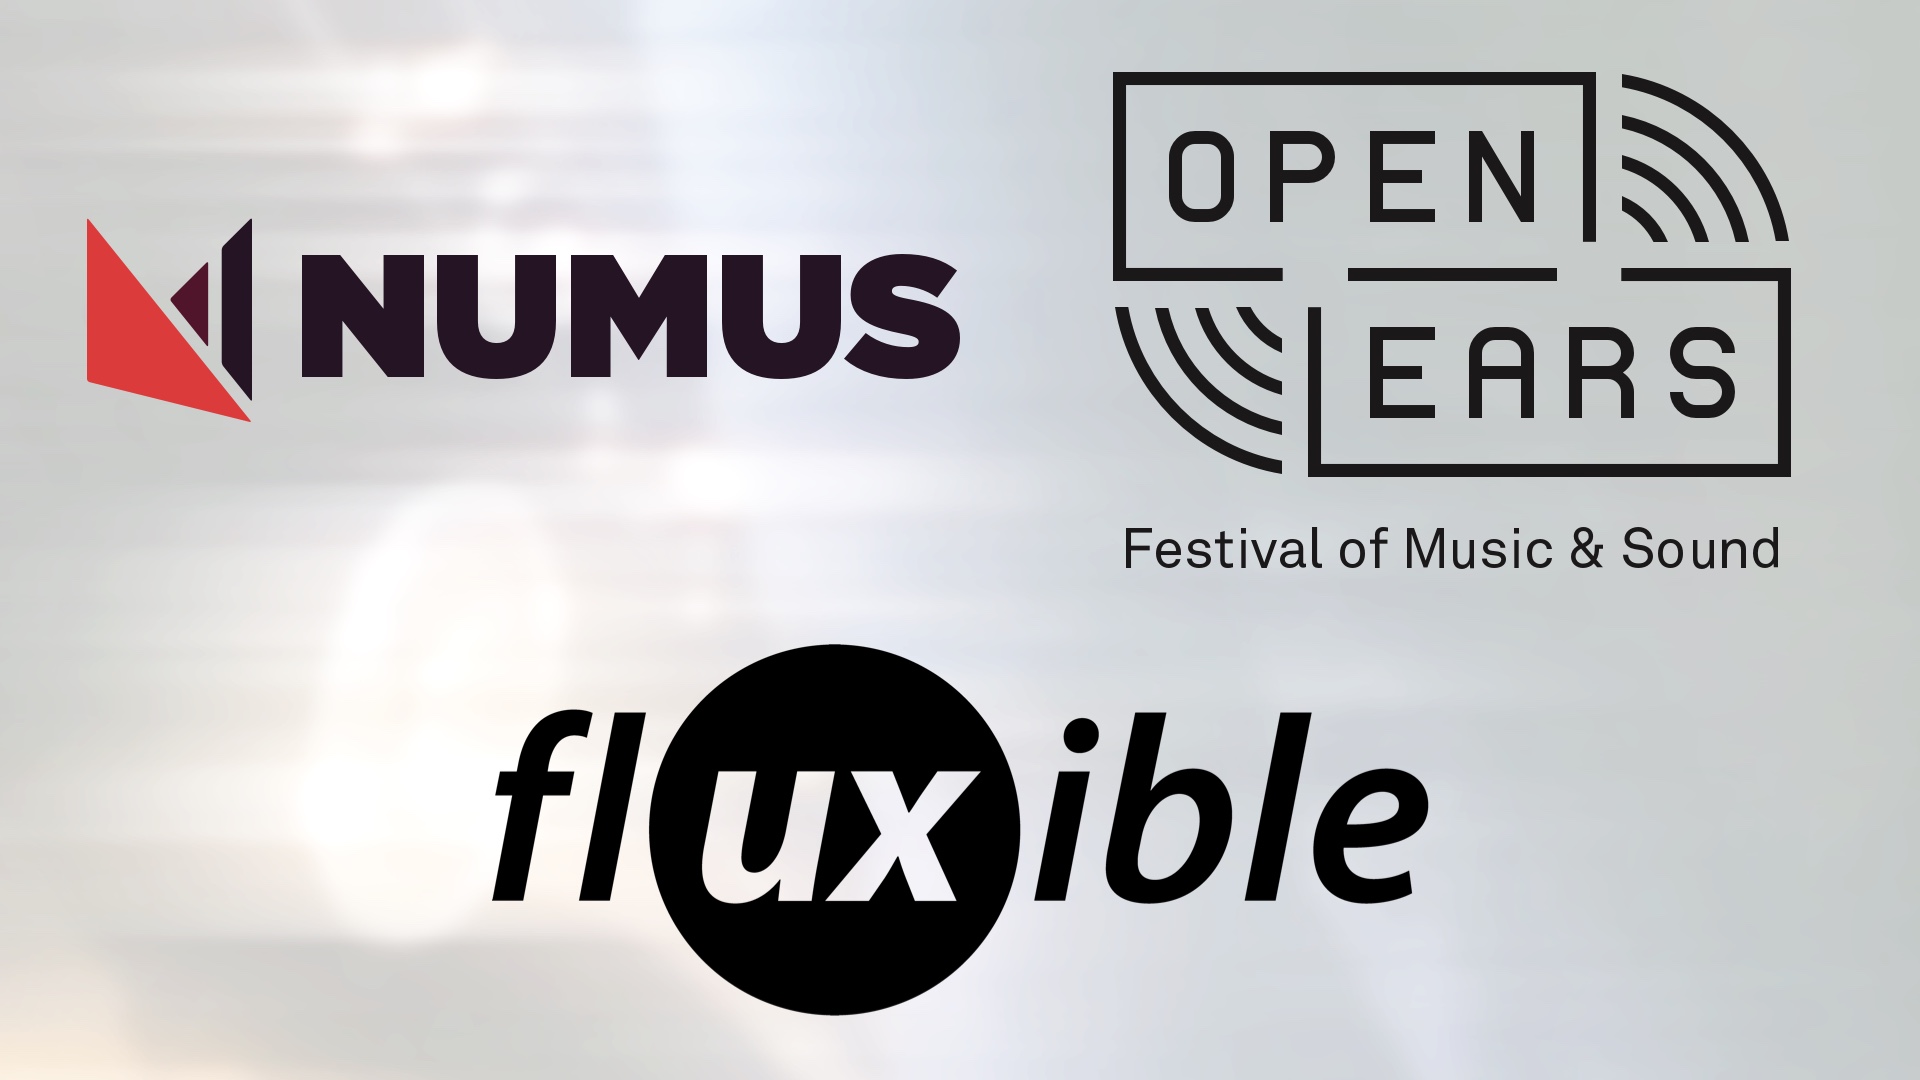 Logos for Fluxible, Open Ears, and NUMUS